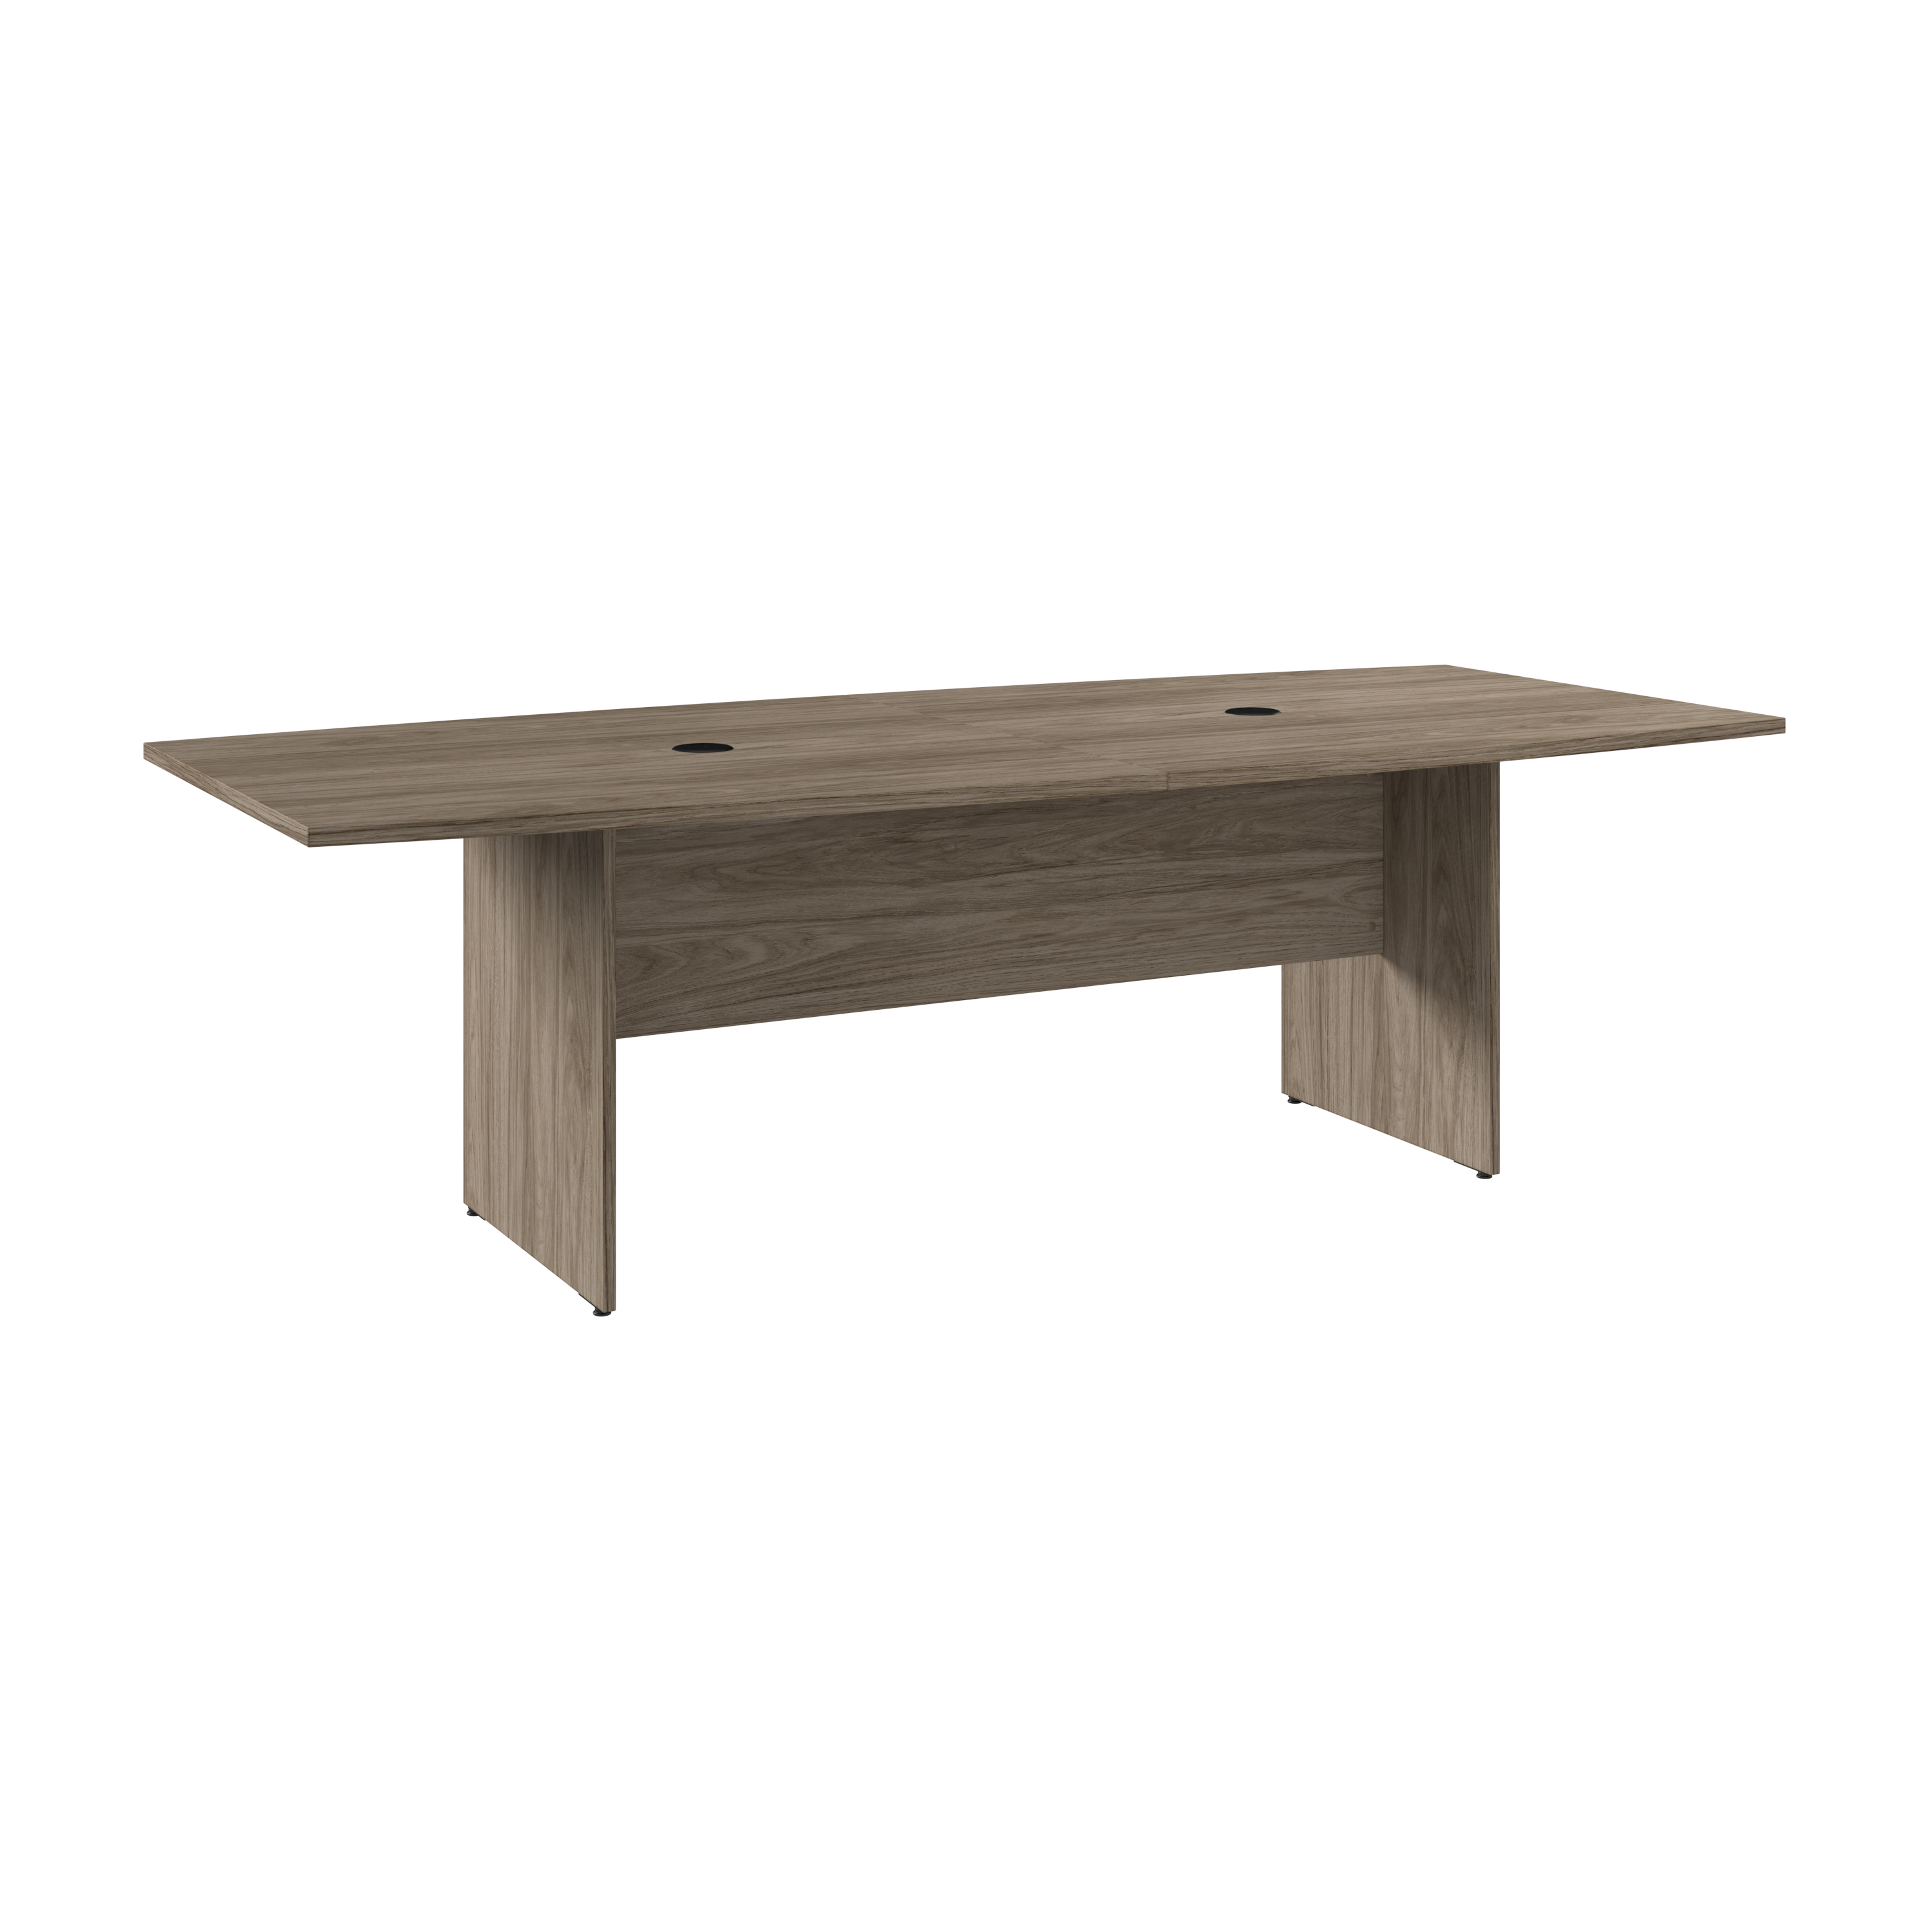 Shop Bush Business Furniture 96W x 42D Boat Shaped Conference Table with Wood Base 02 99TB9642MHK #color_modern hickory